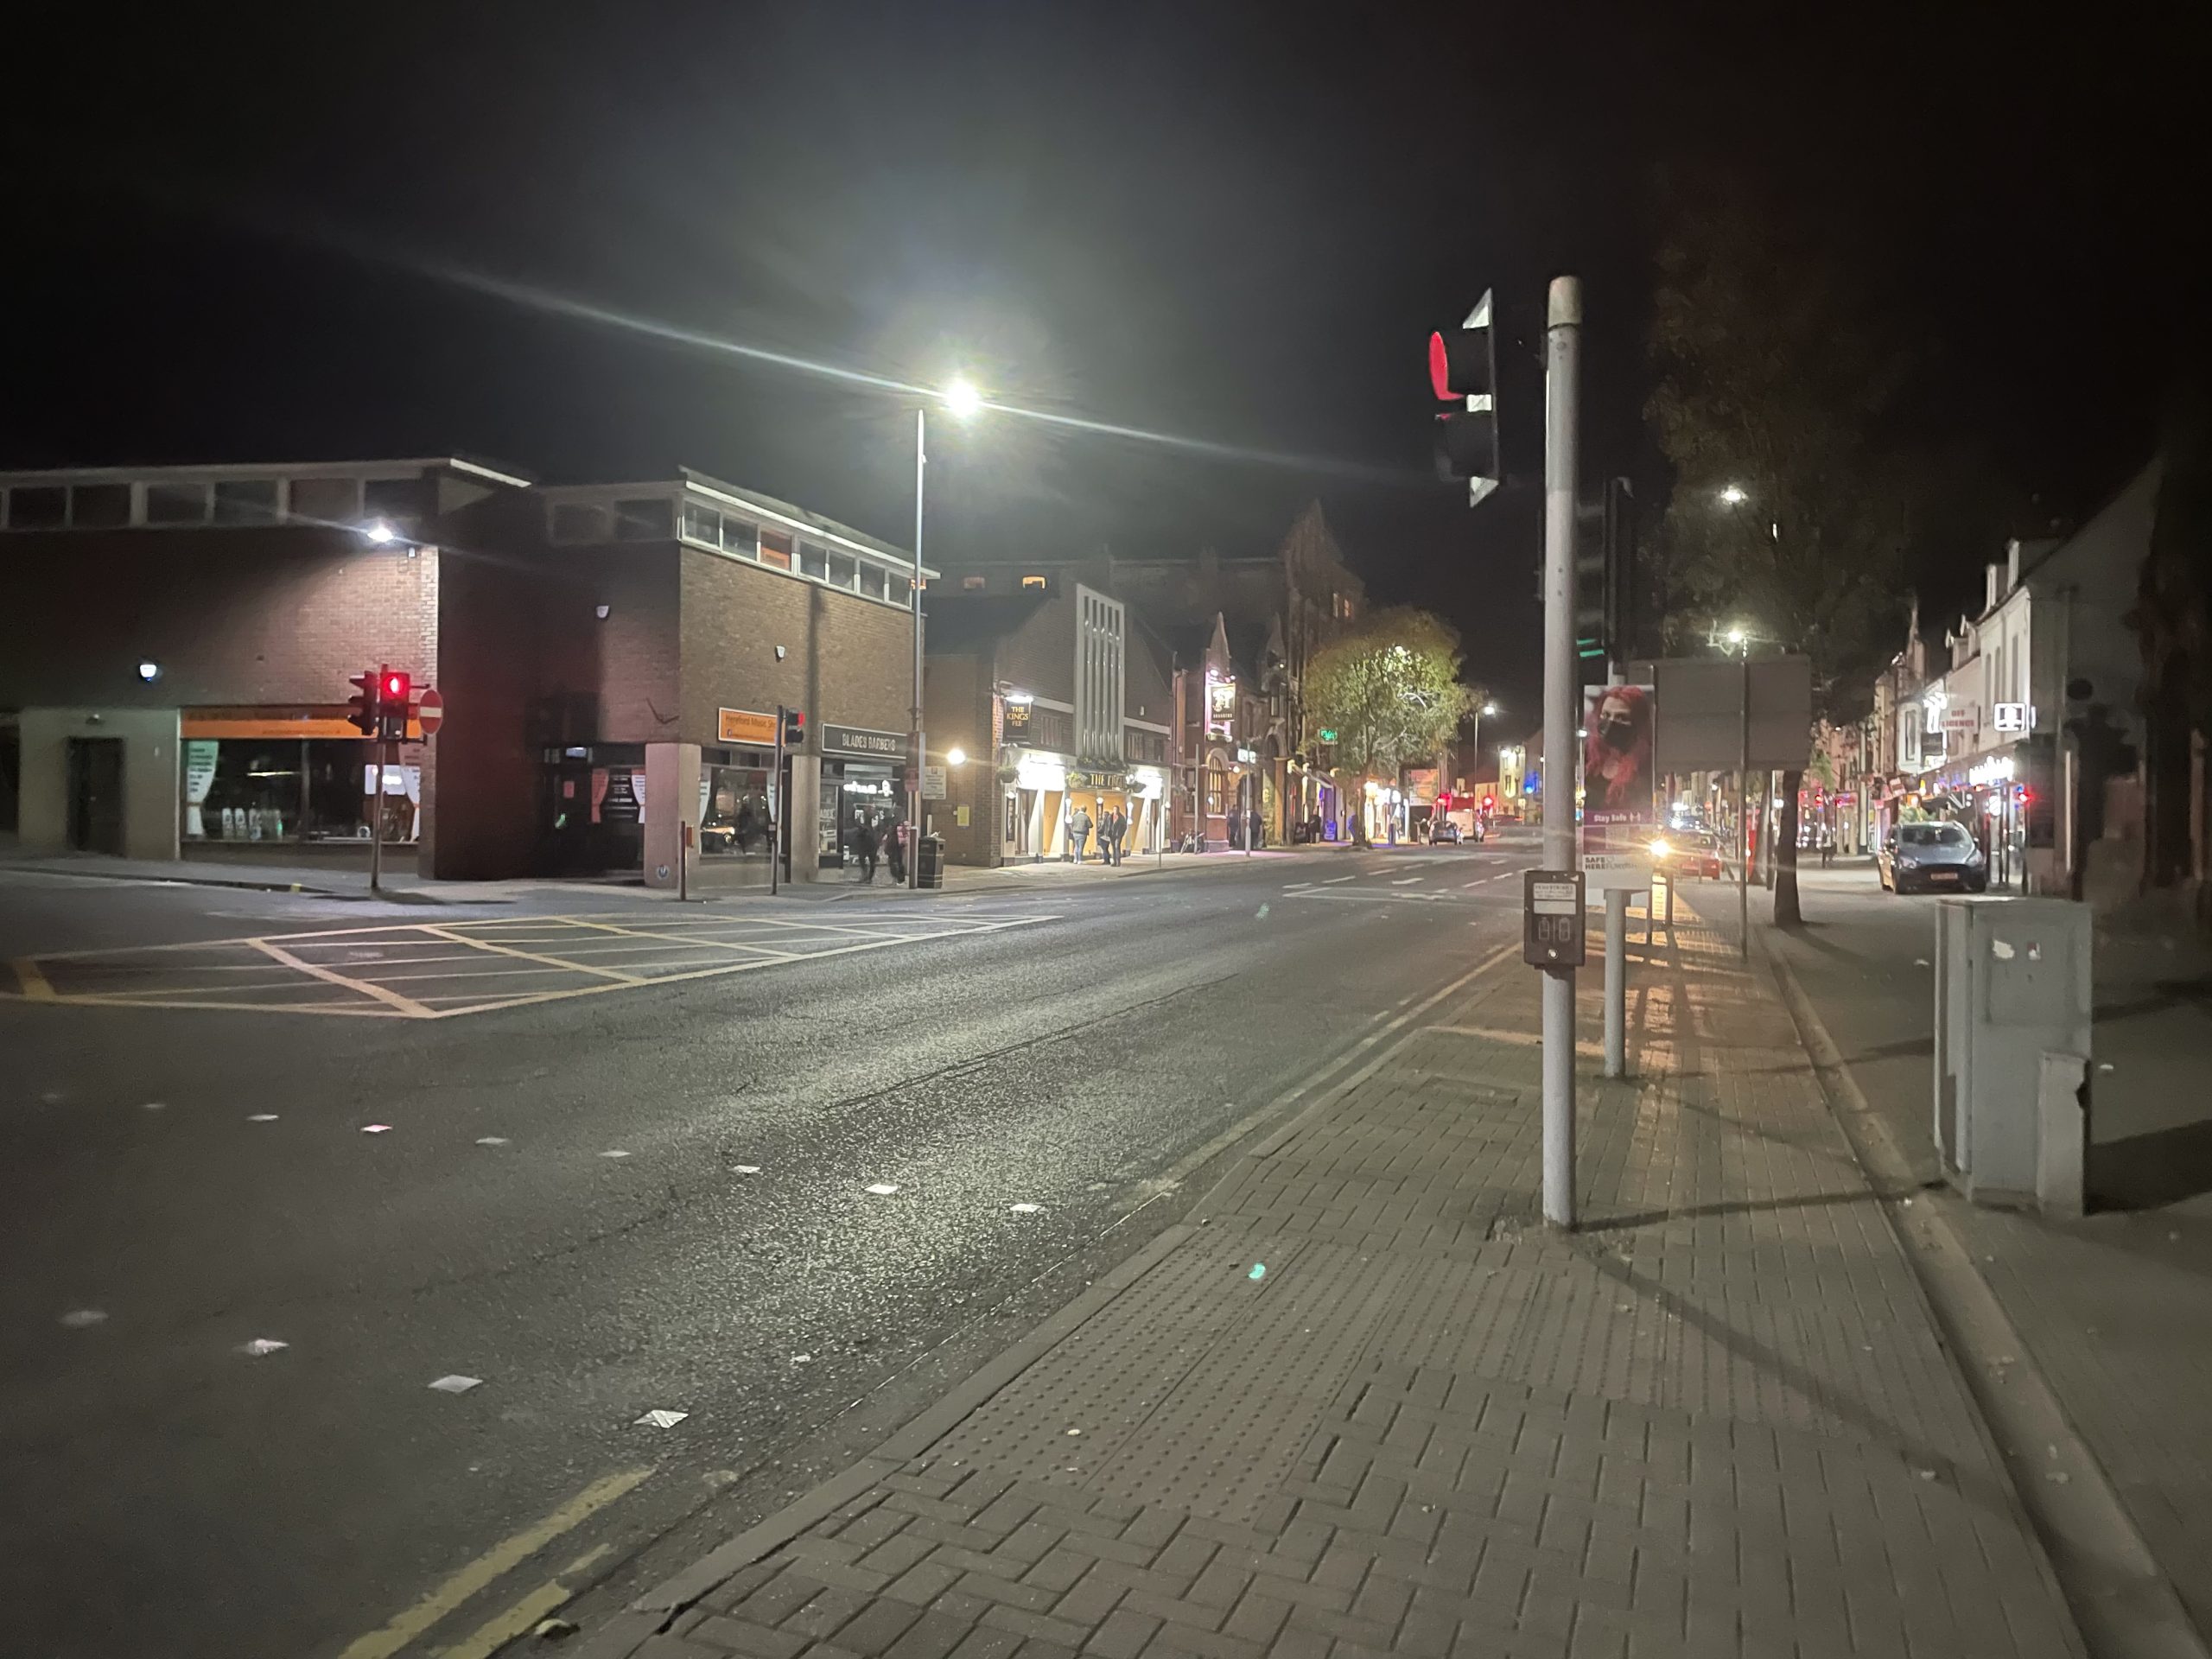 NEWS | Incident involving fireworks on Commercial Road in Hereford